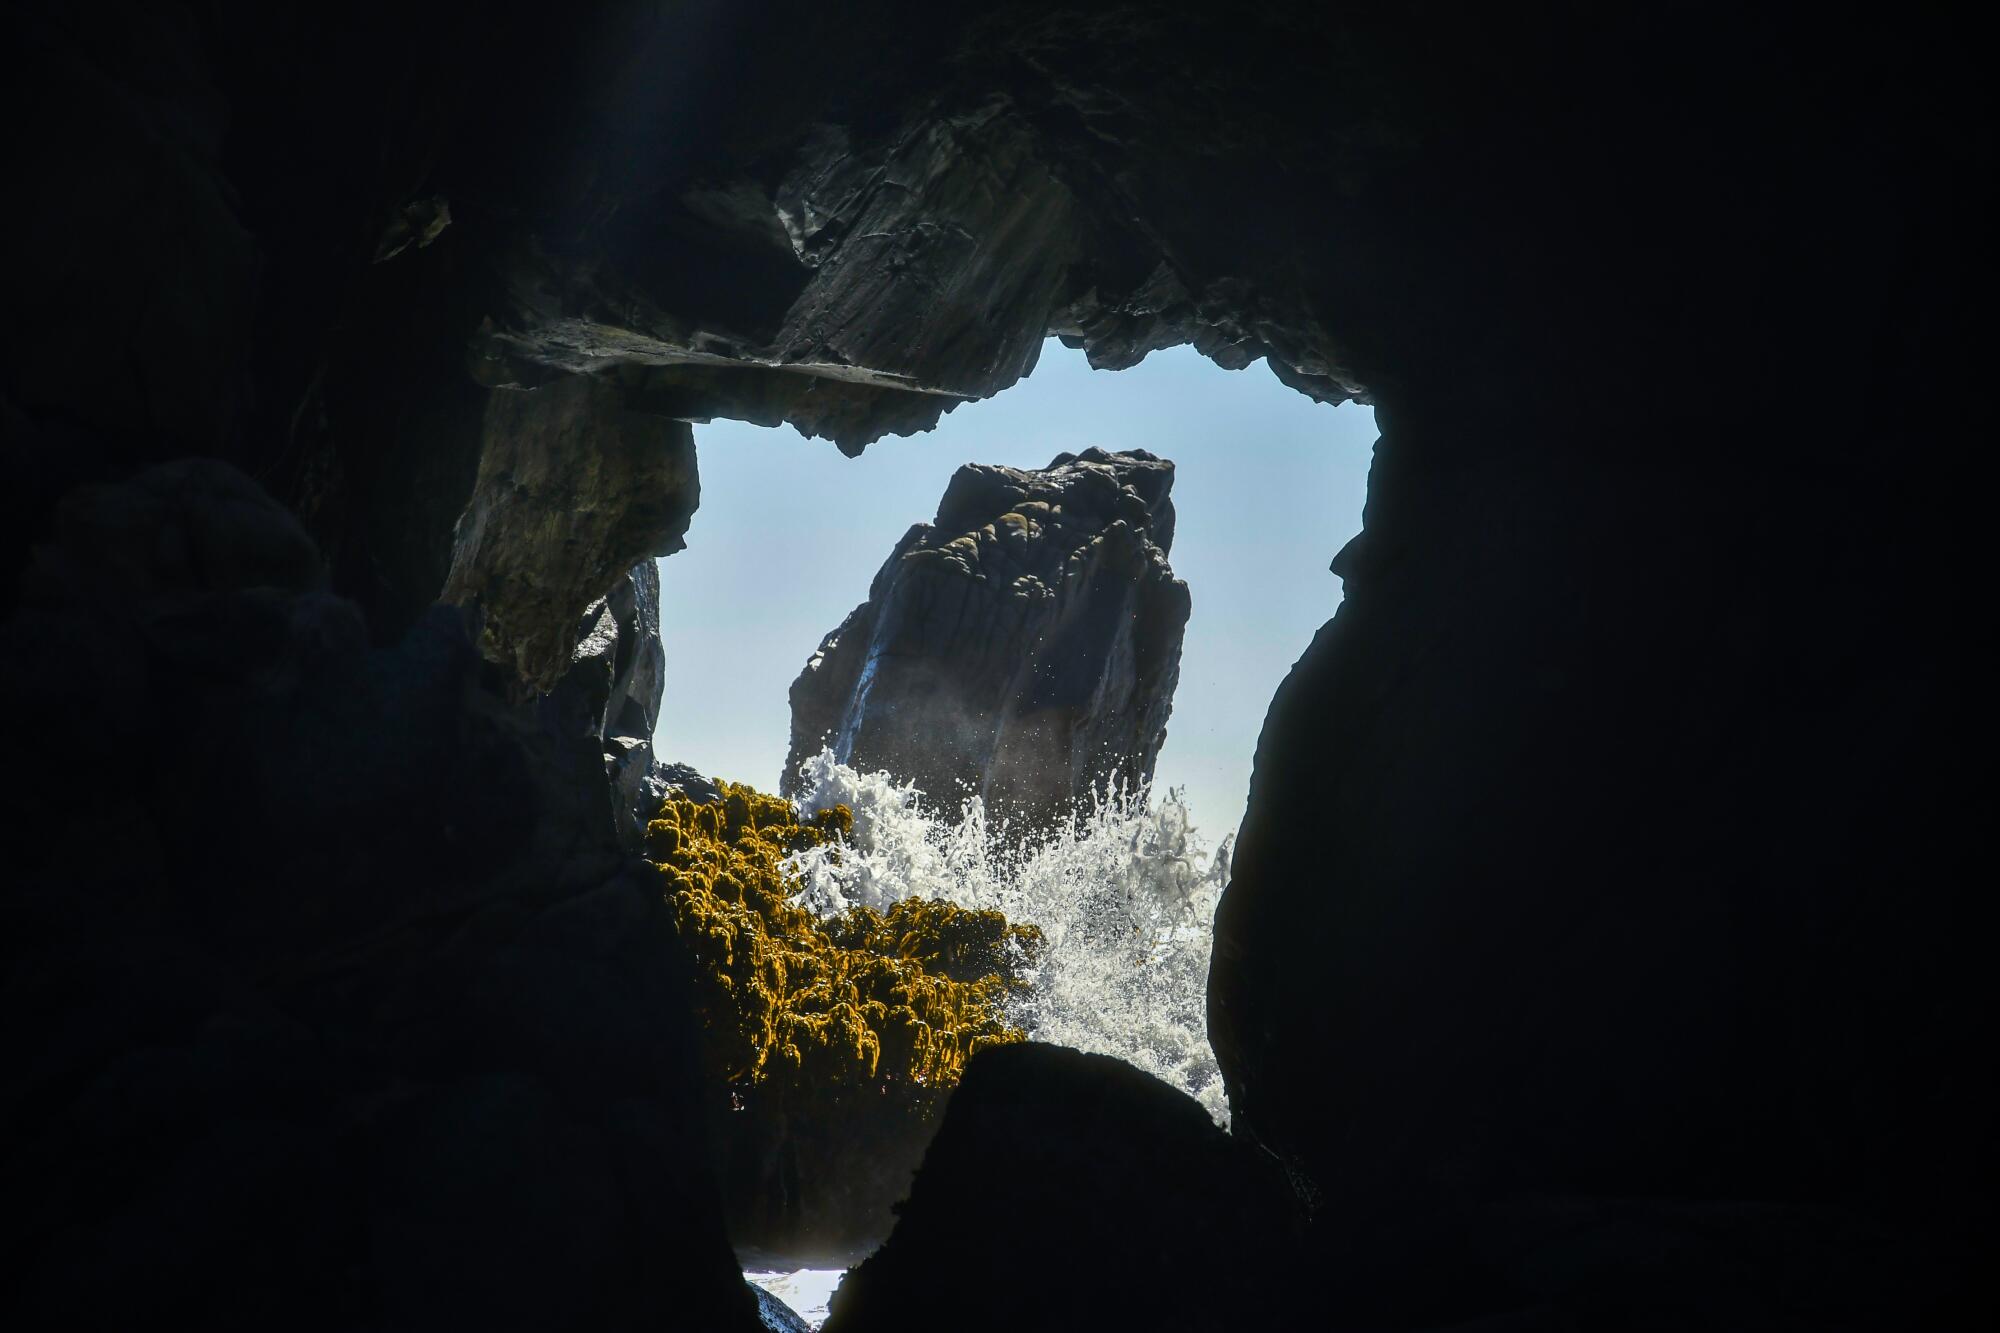 Pfeiffer Beach is a mile-long beach with a boulder configuration called Keyhole Rock. 